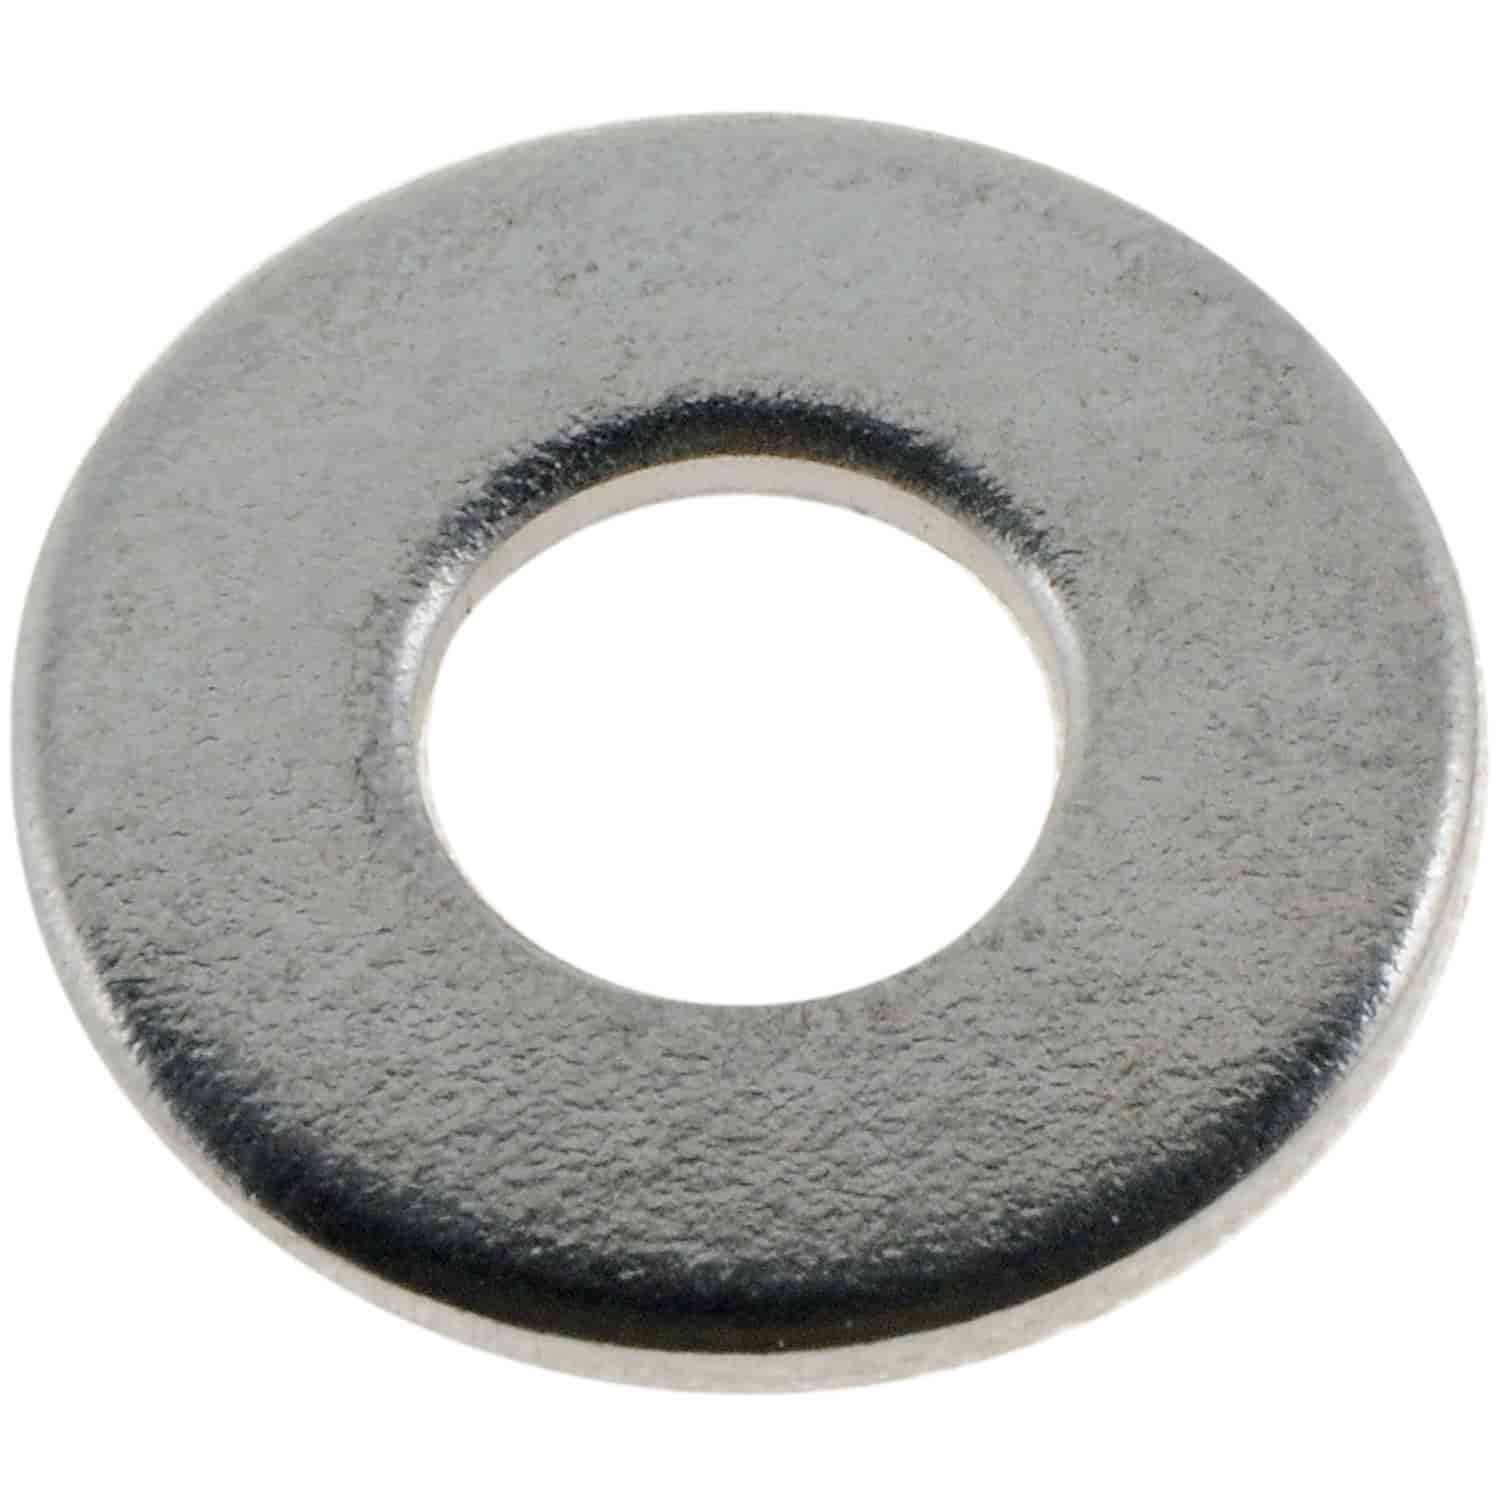 Flat Washer-Grade 5- 3/16 In.